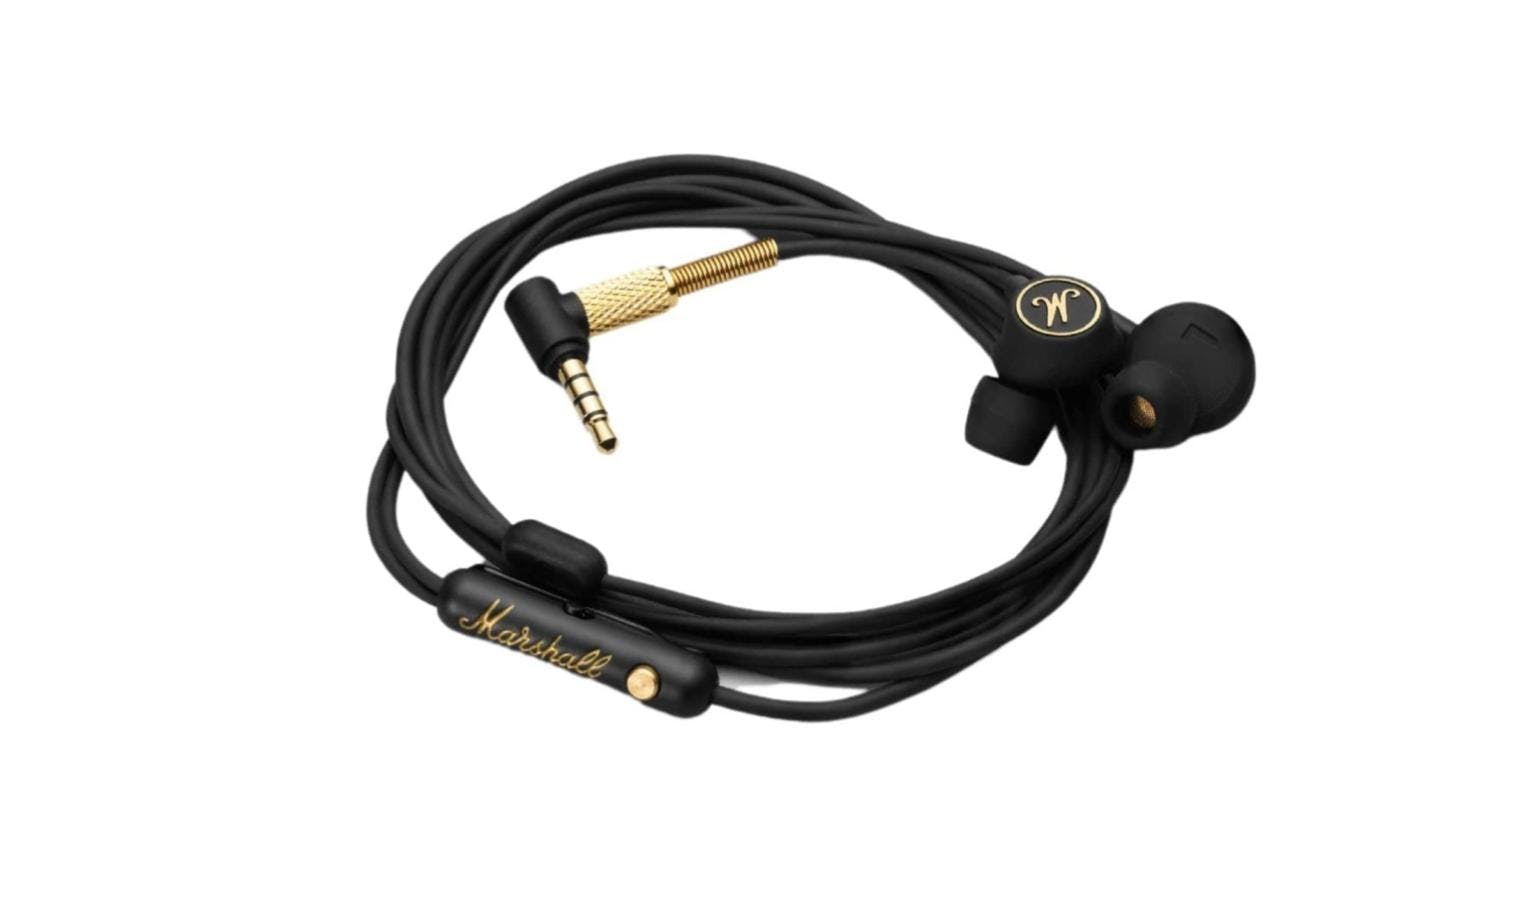 Marshall Mode EQ Wired In-Ear Headphones - Black and Brass | Harvey Norman  Singapore